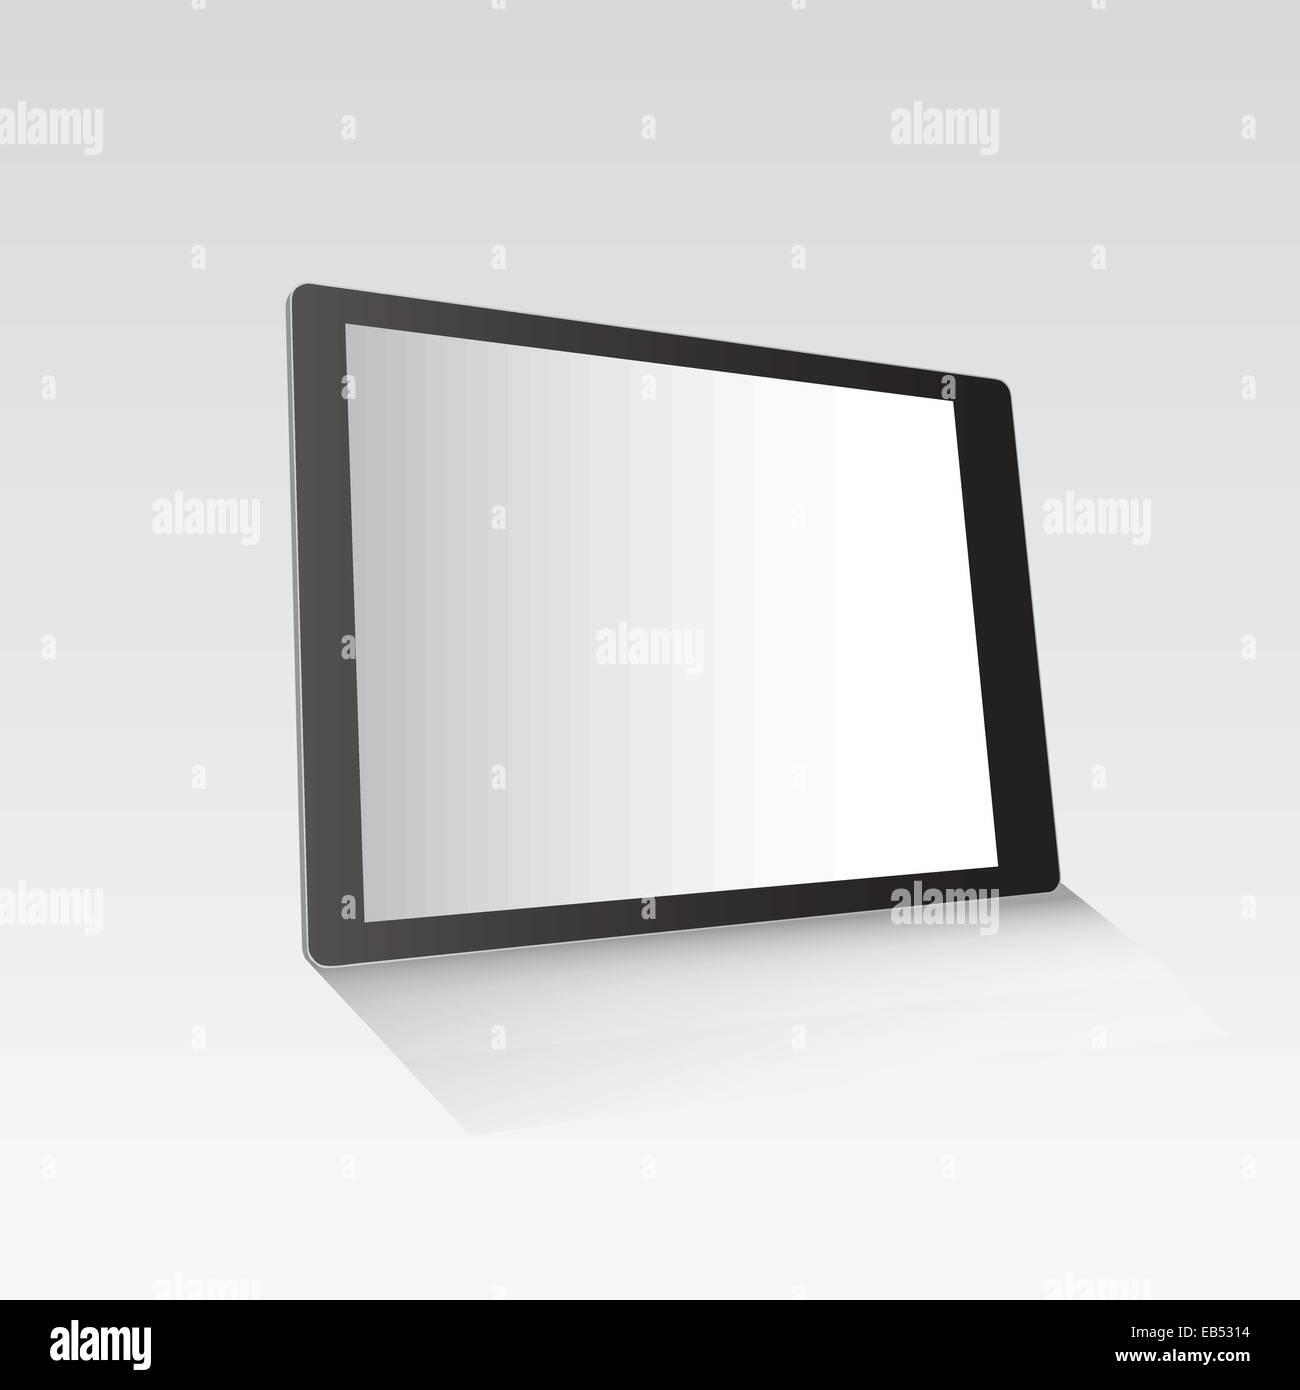 Digital tablet standing on grey surface Stock Vector